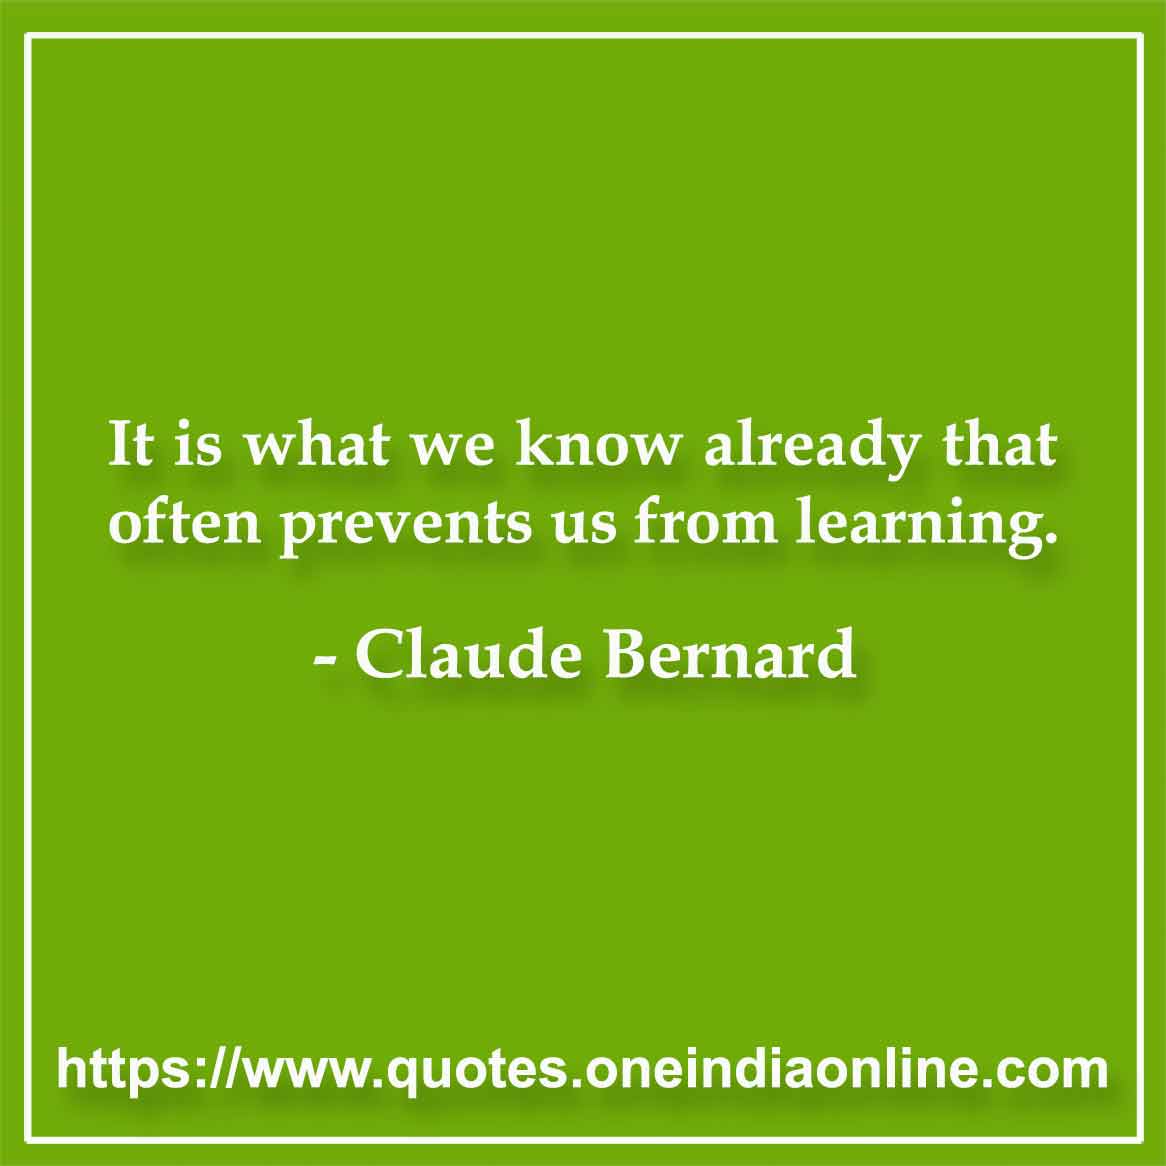 It is what we know already that often prevents us from learning. Claude Bernard